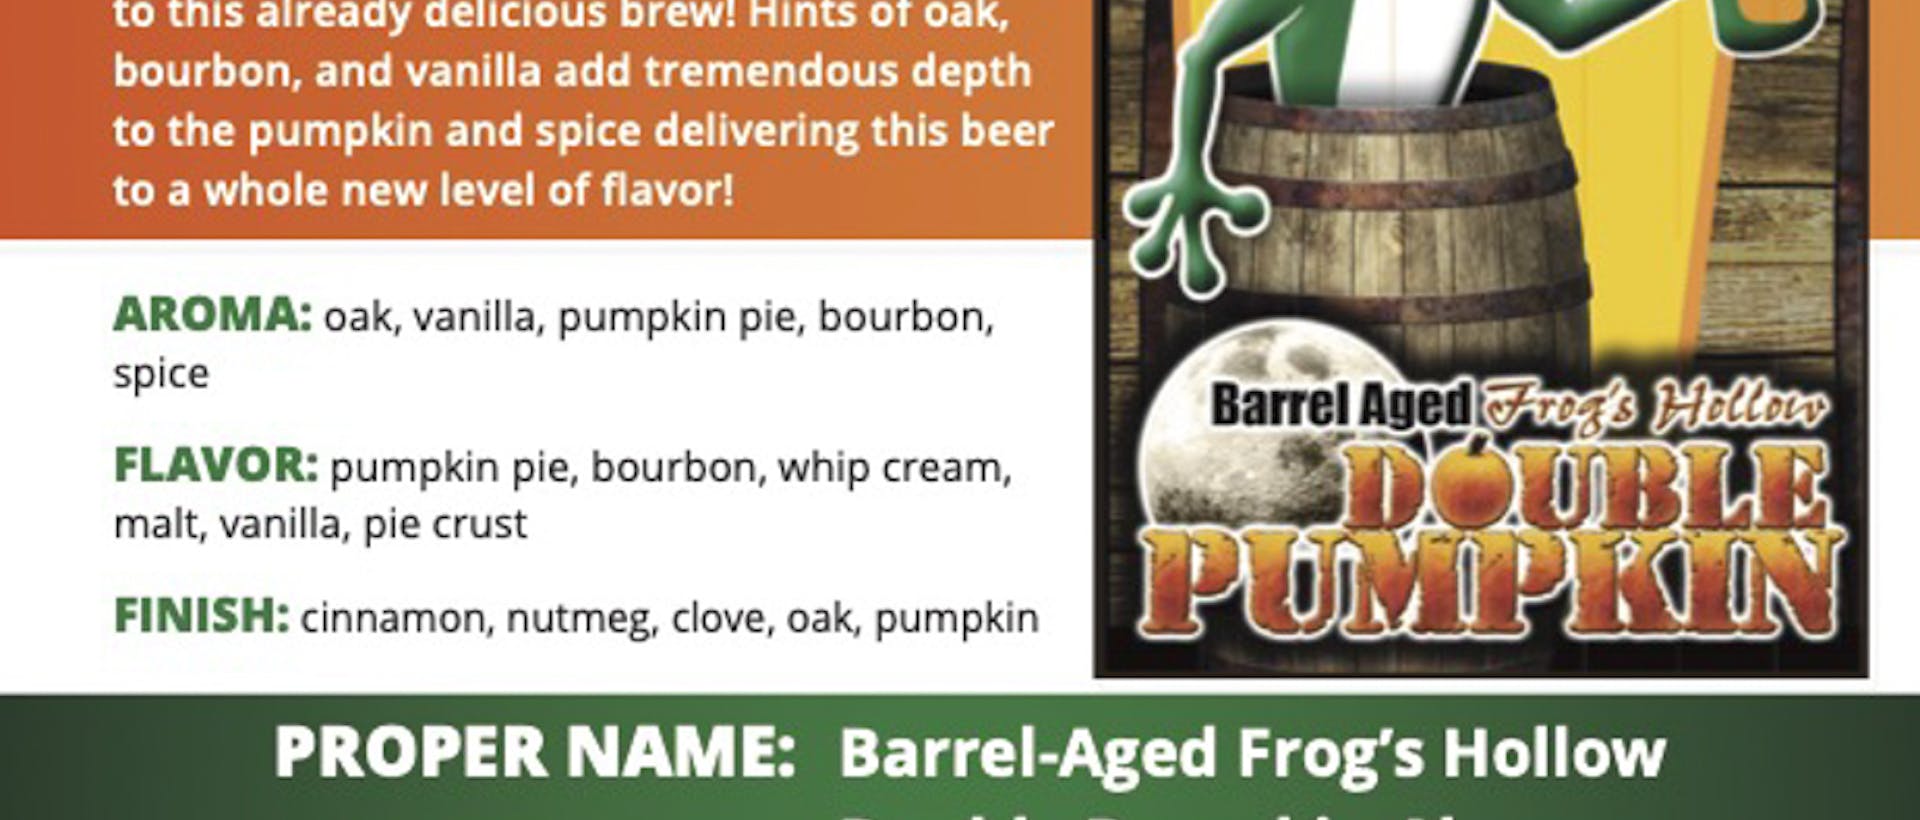 HF_Sell Sheet - Barrel-Aged Series - Barrel-Aged Frogs Hollow Double Pumpkin Ale (updated 03-14-2022)